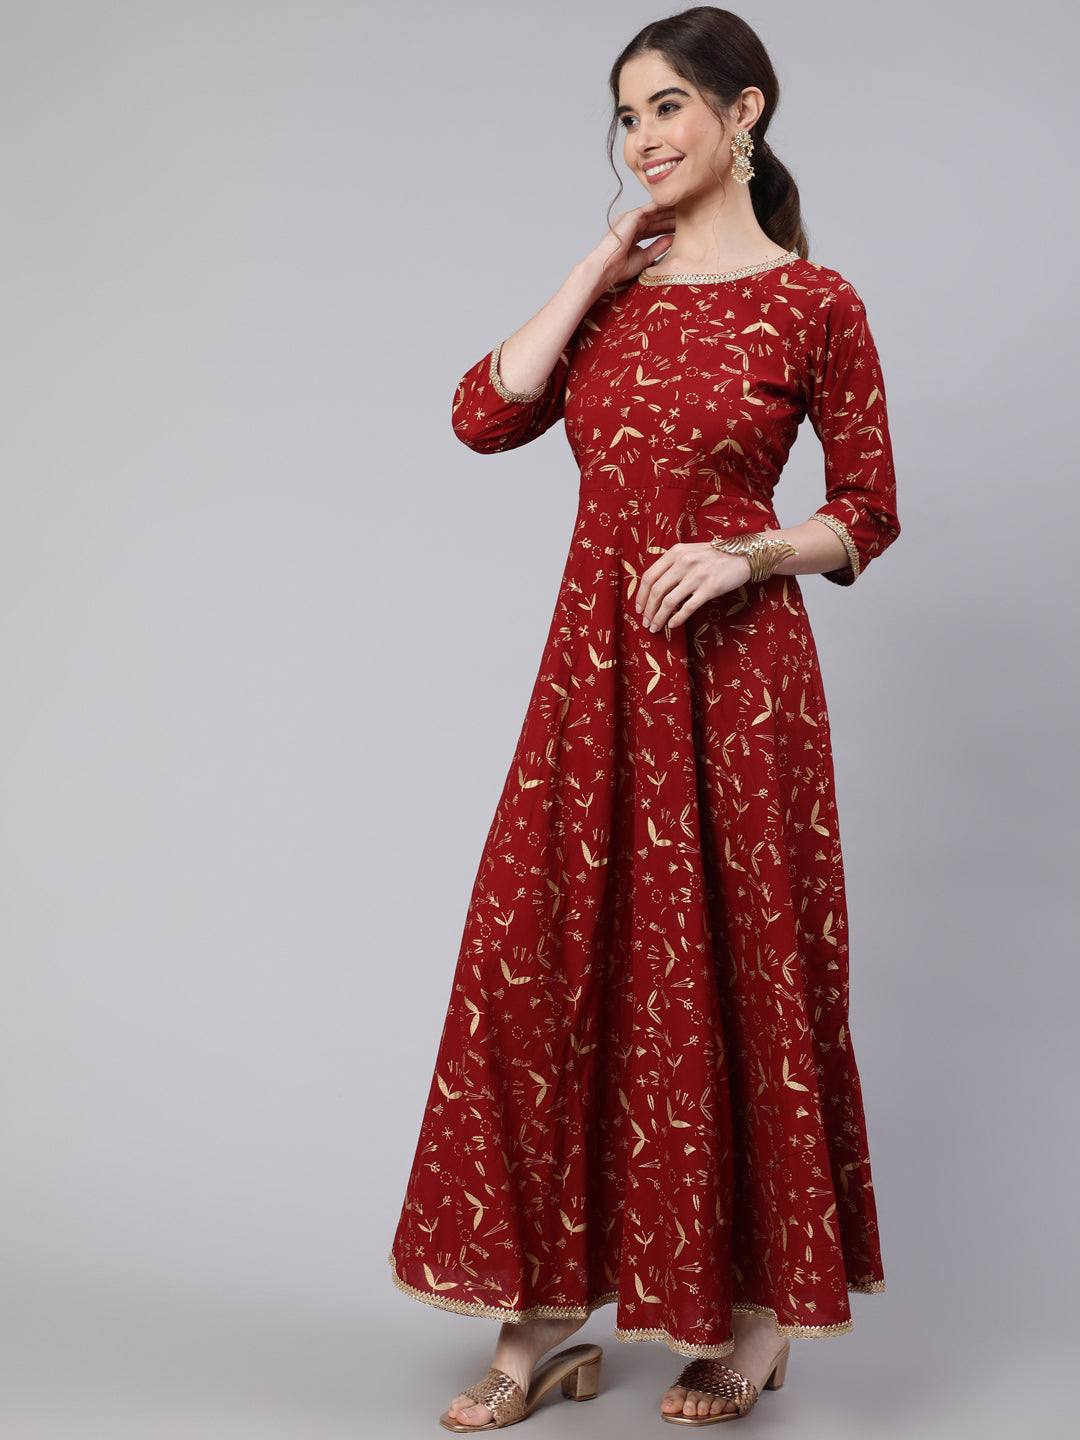 Women's Wome Maroon Printed Flared Dress With Three quarter Sleeves - Nayo Clothing